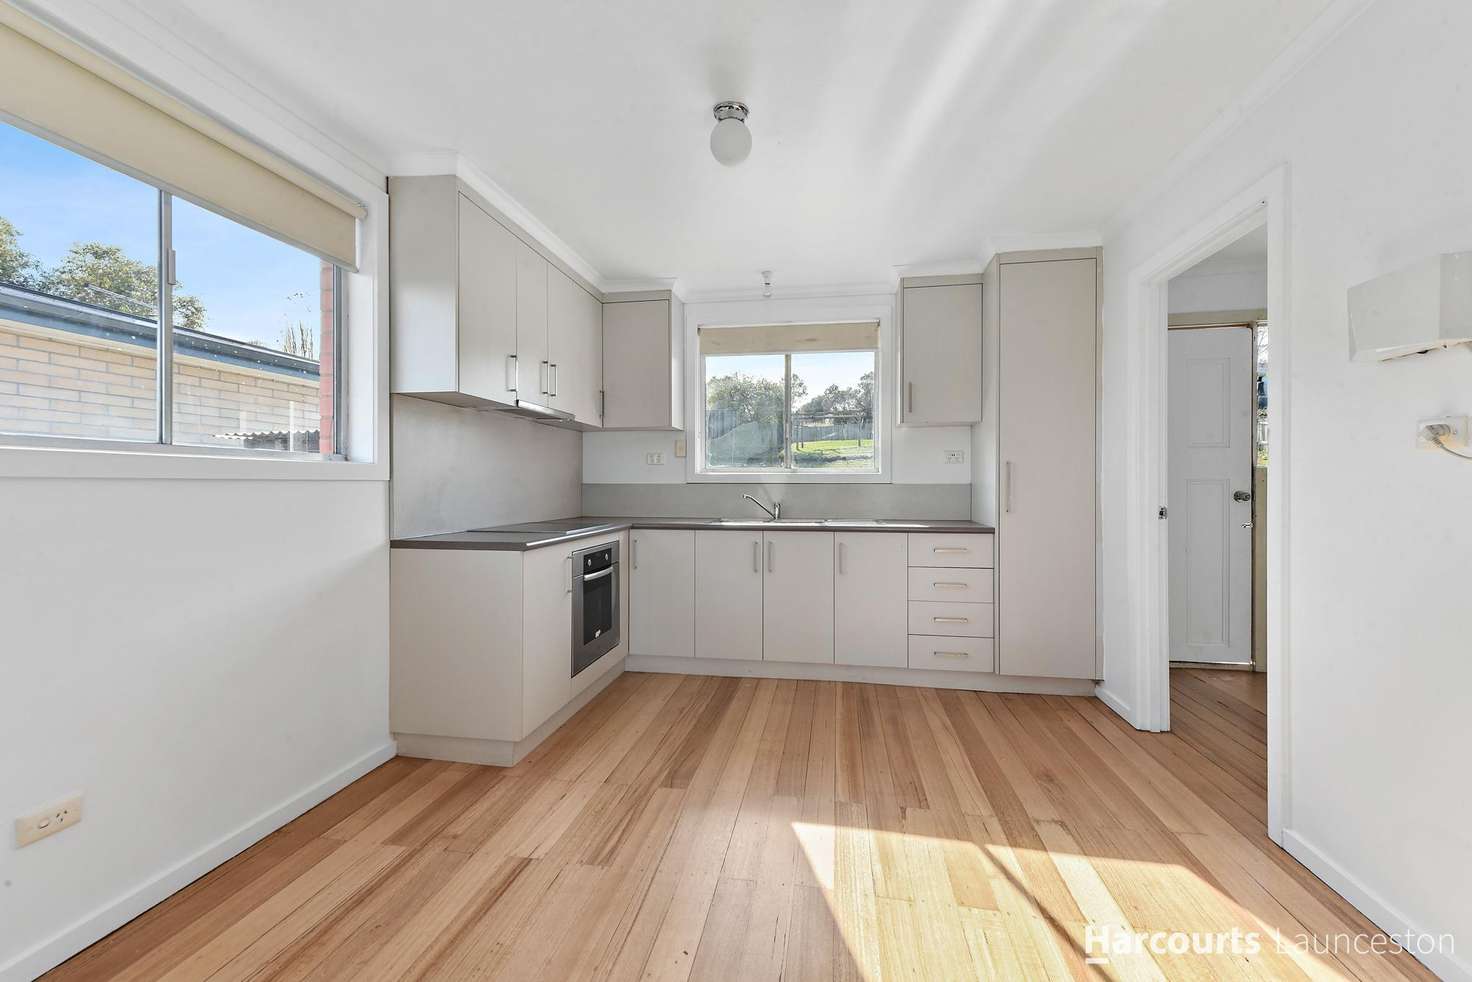 Main view of Homely house listing, 37 Wildor Crescent, Ravenswood TAS 7250